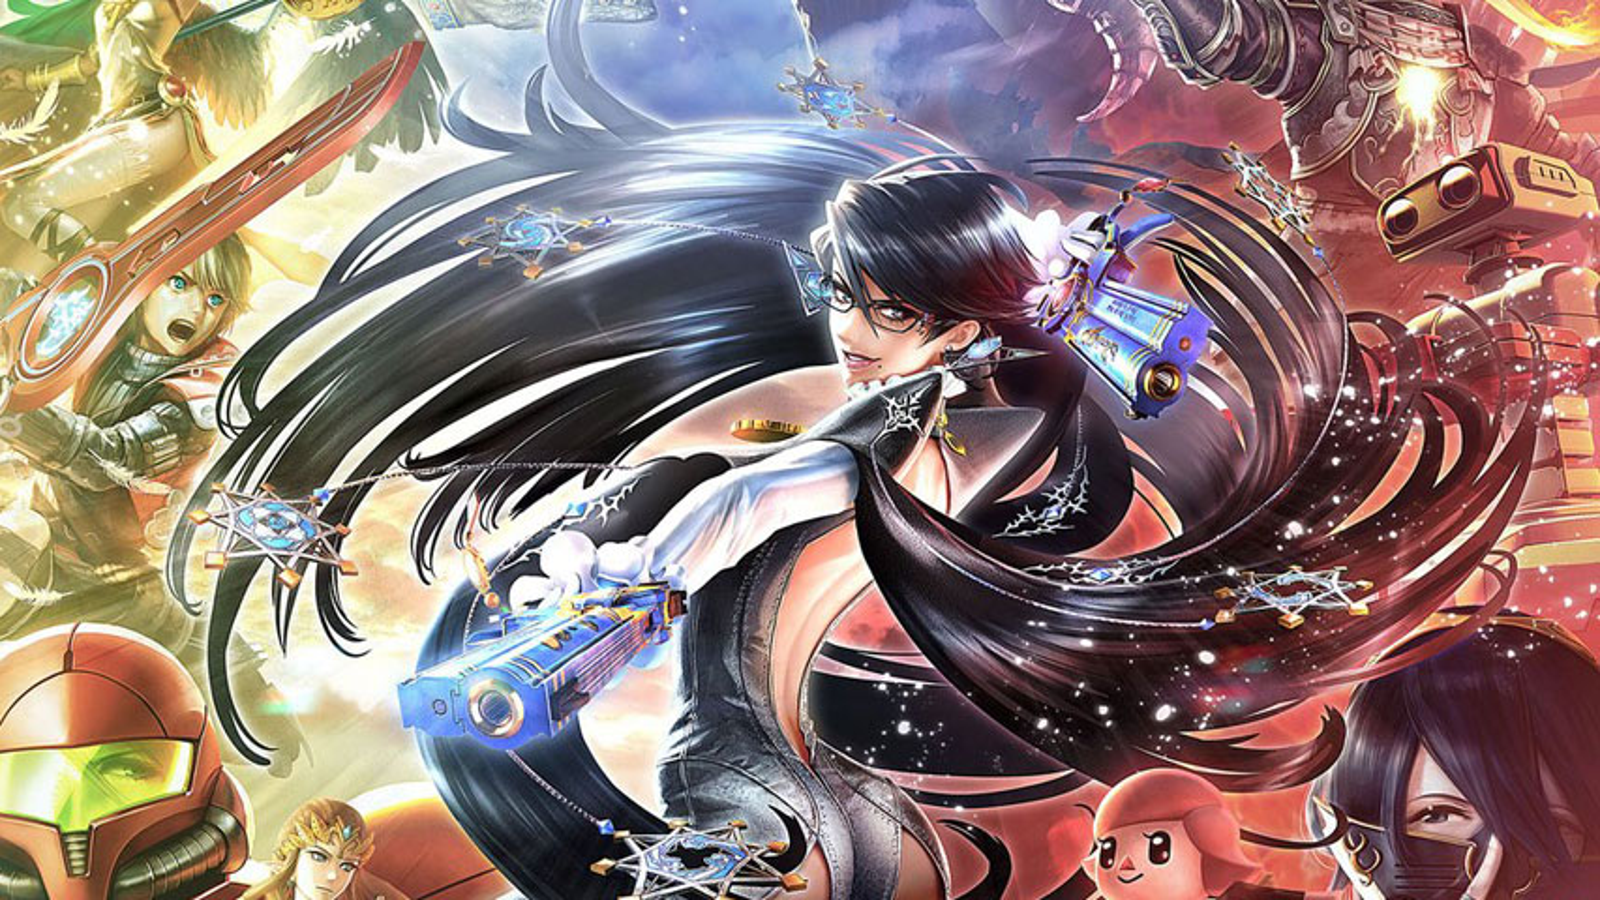 Bayonetta and Corrin now available for Super Smash Bros. 3DS and Wii U